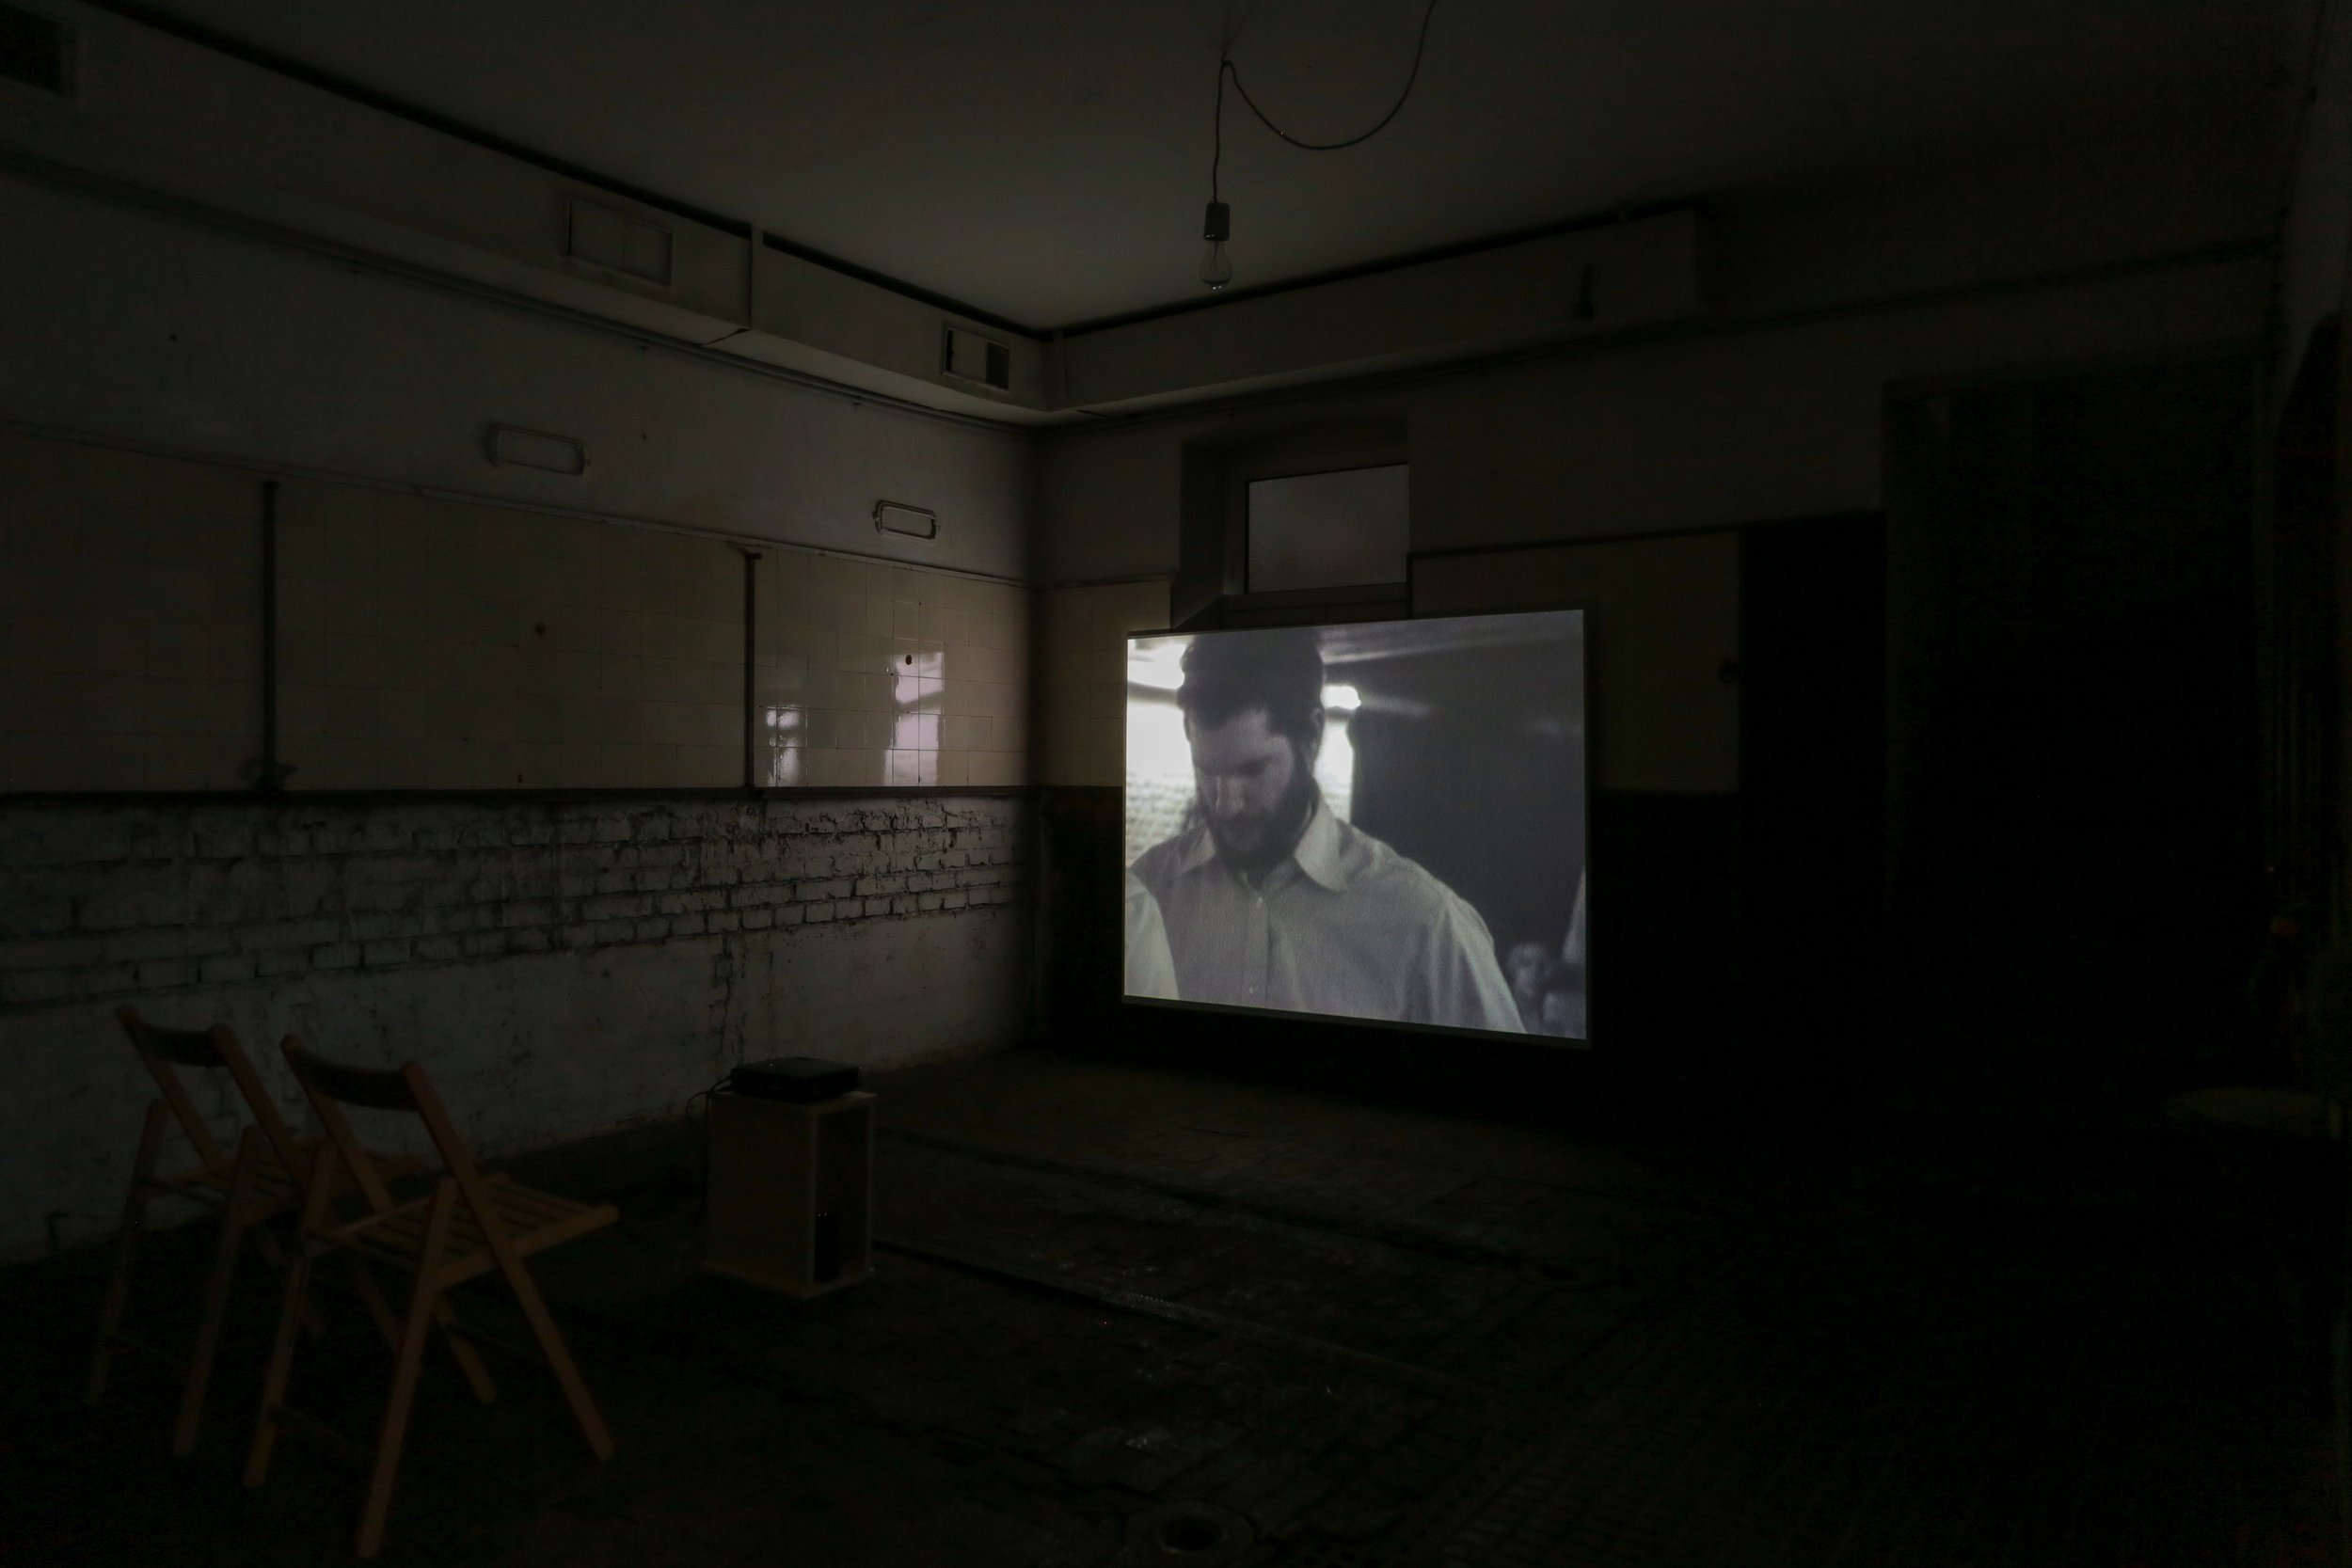   fig1 installation view Dan Graham, Audience/Performer/Mirror, 1977, 00:17:45., In collections: De Appel, LIMA  